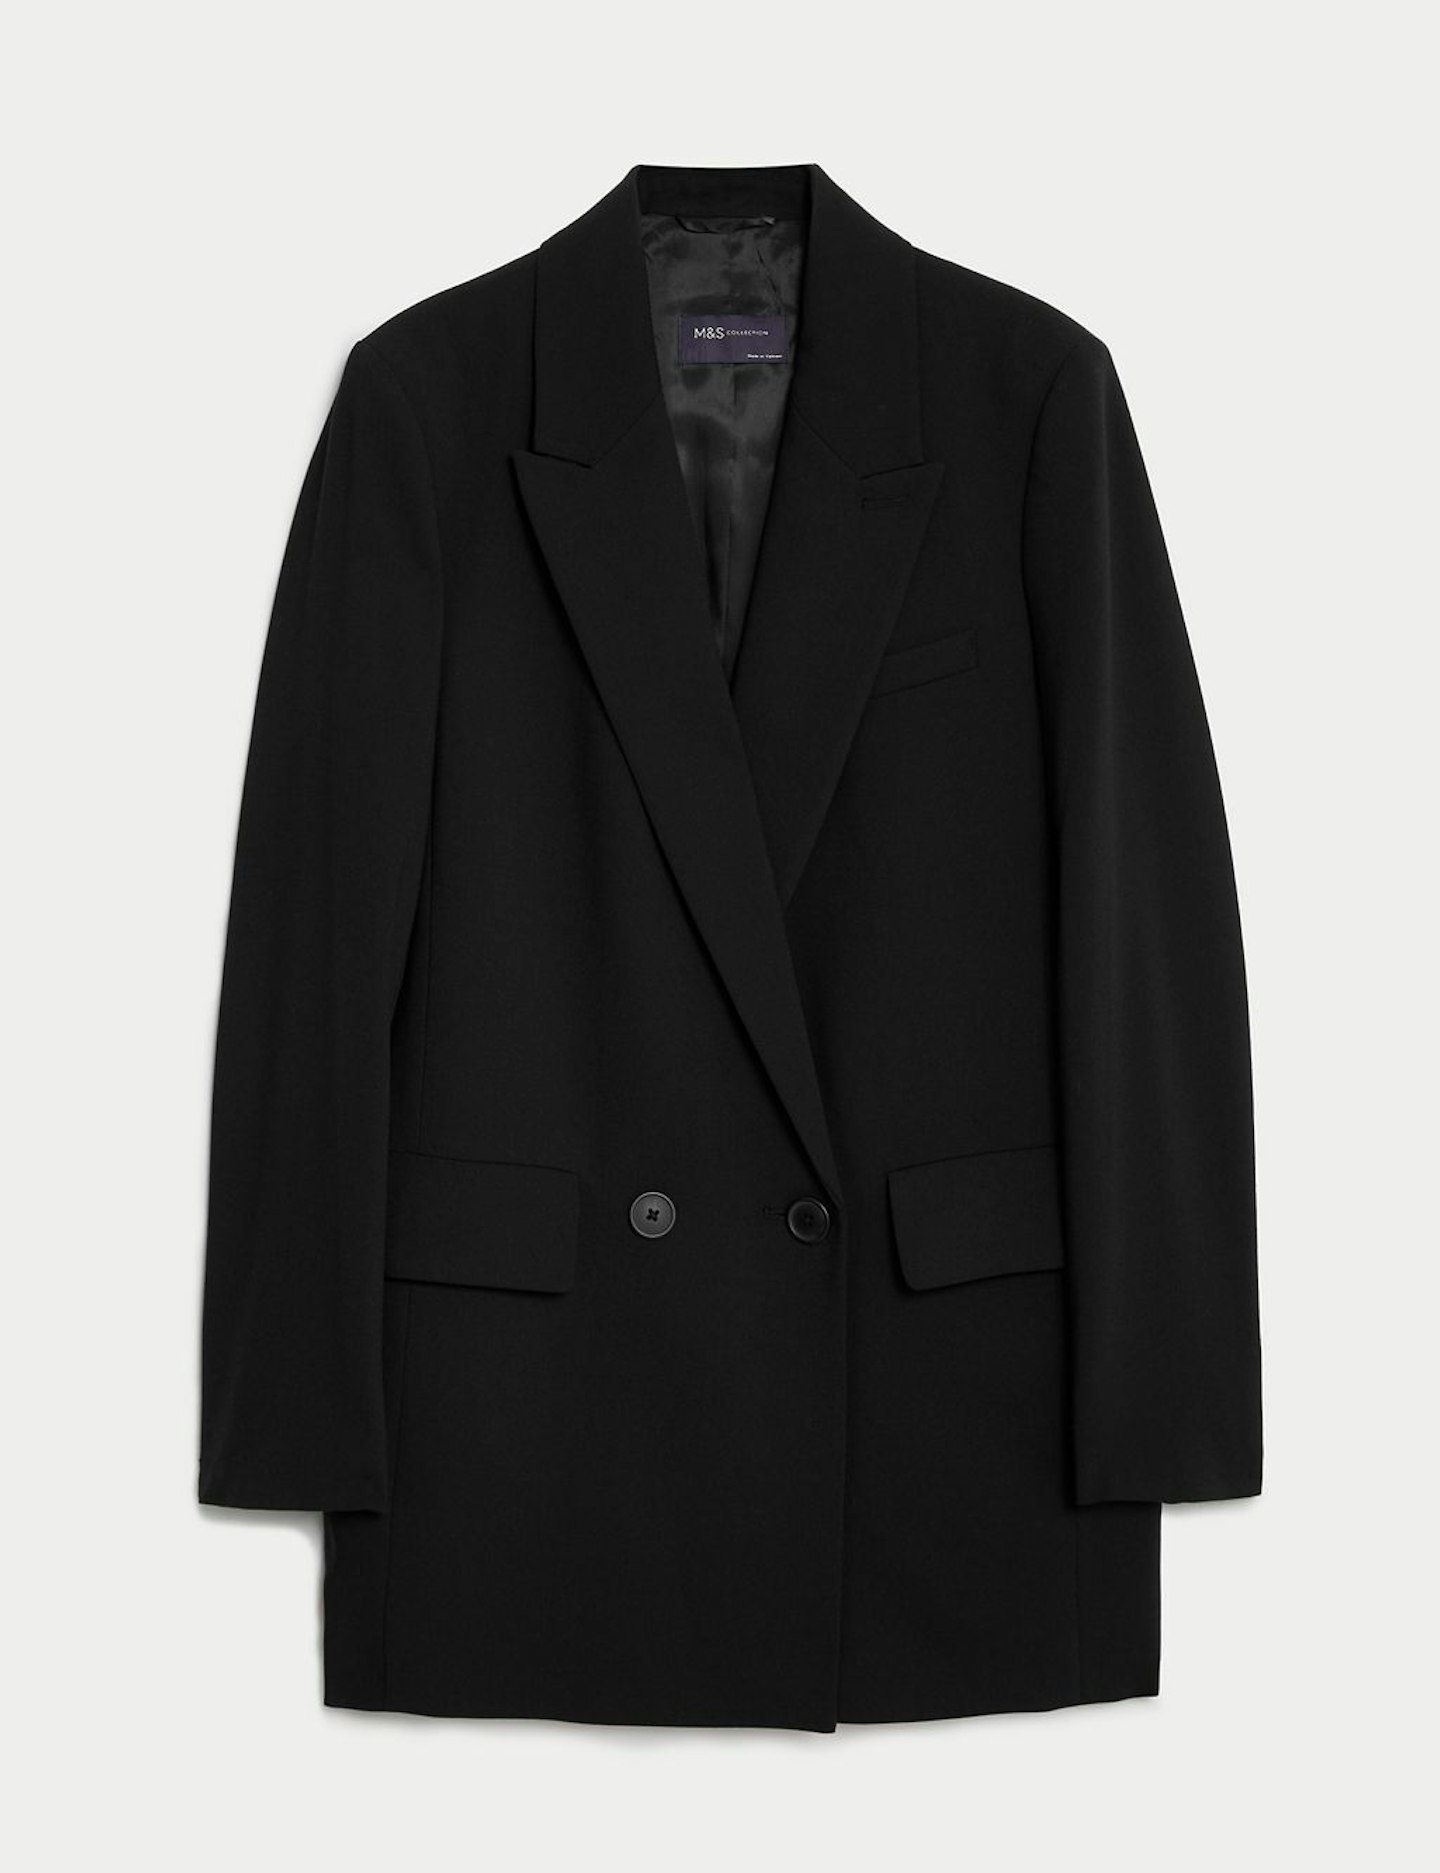 M&S, Relaxed Double-Breasted Blazer